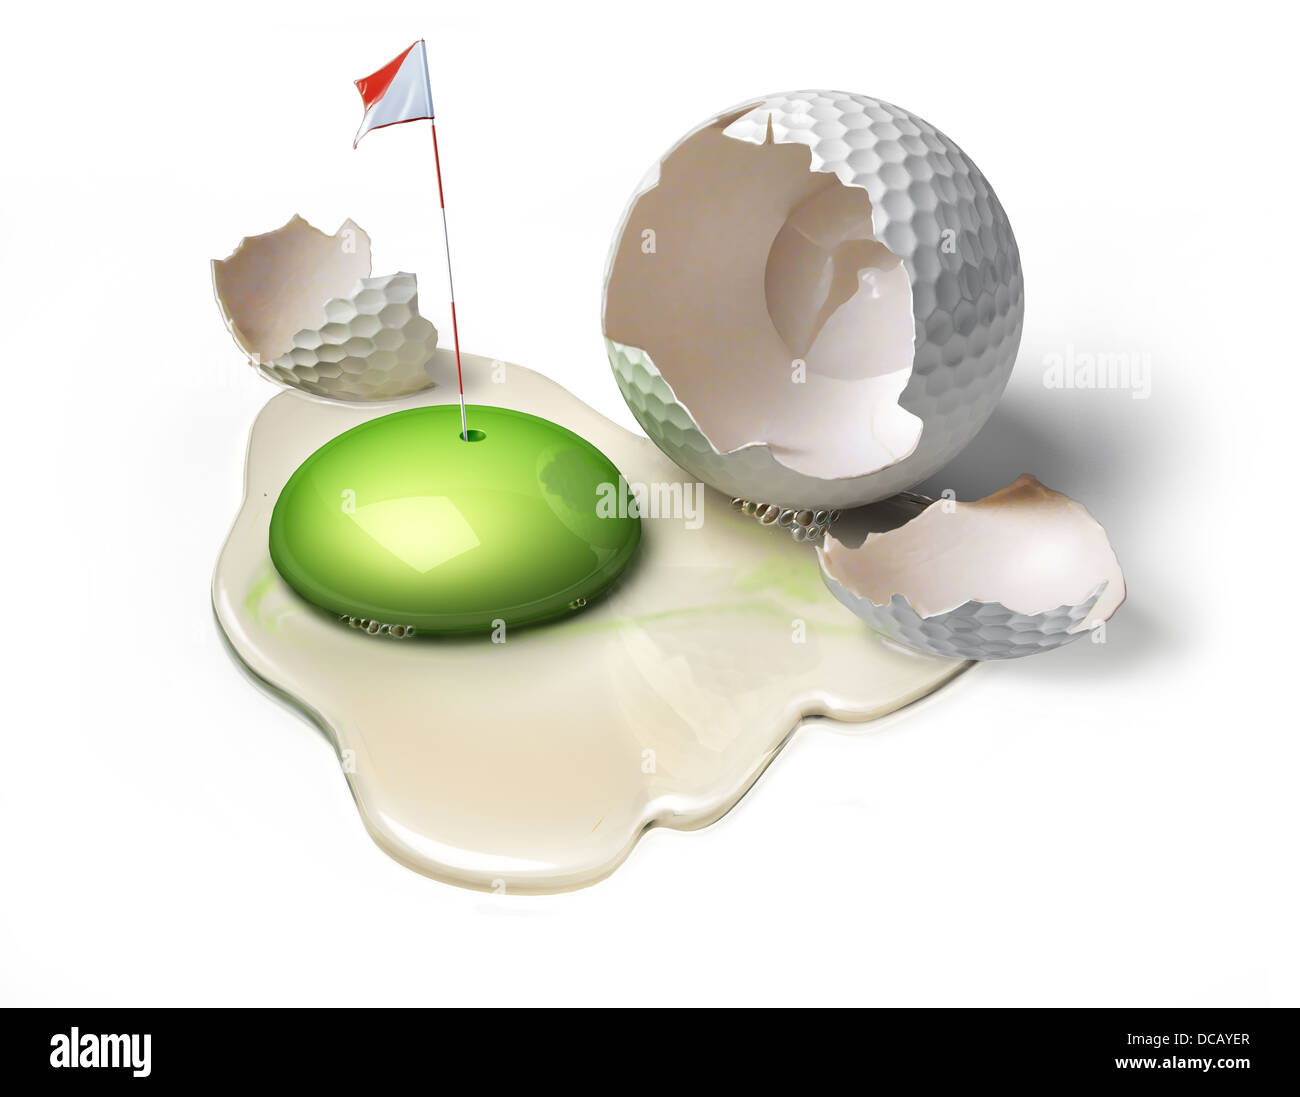 Golf ball as a broken egg with green yolk, representing the game field with hole and flag. Stock Photo